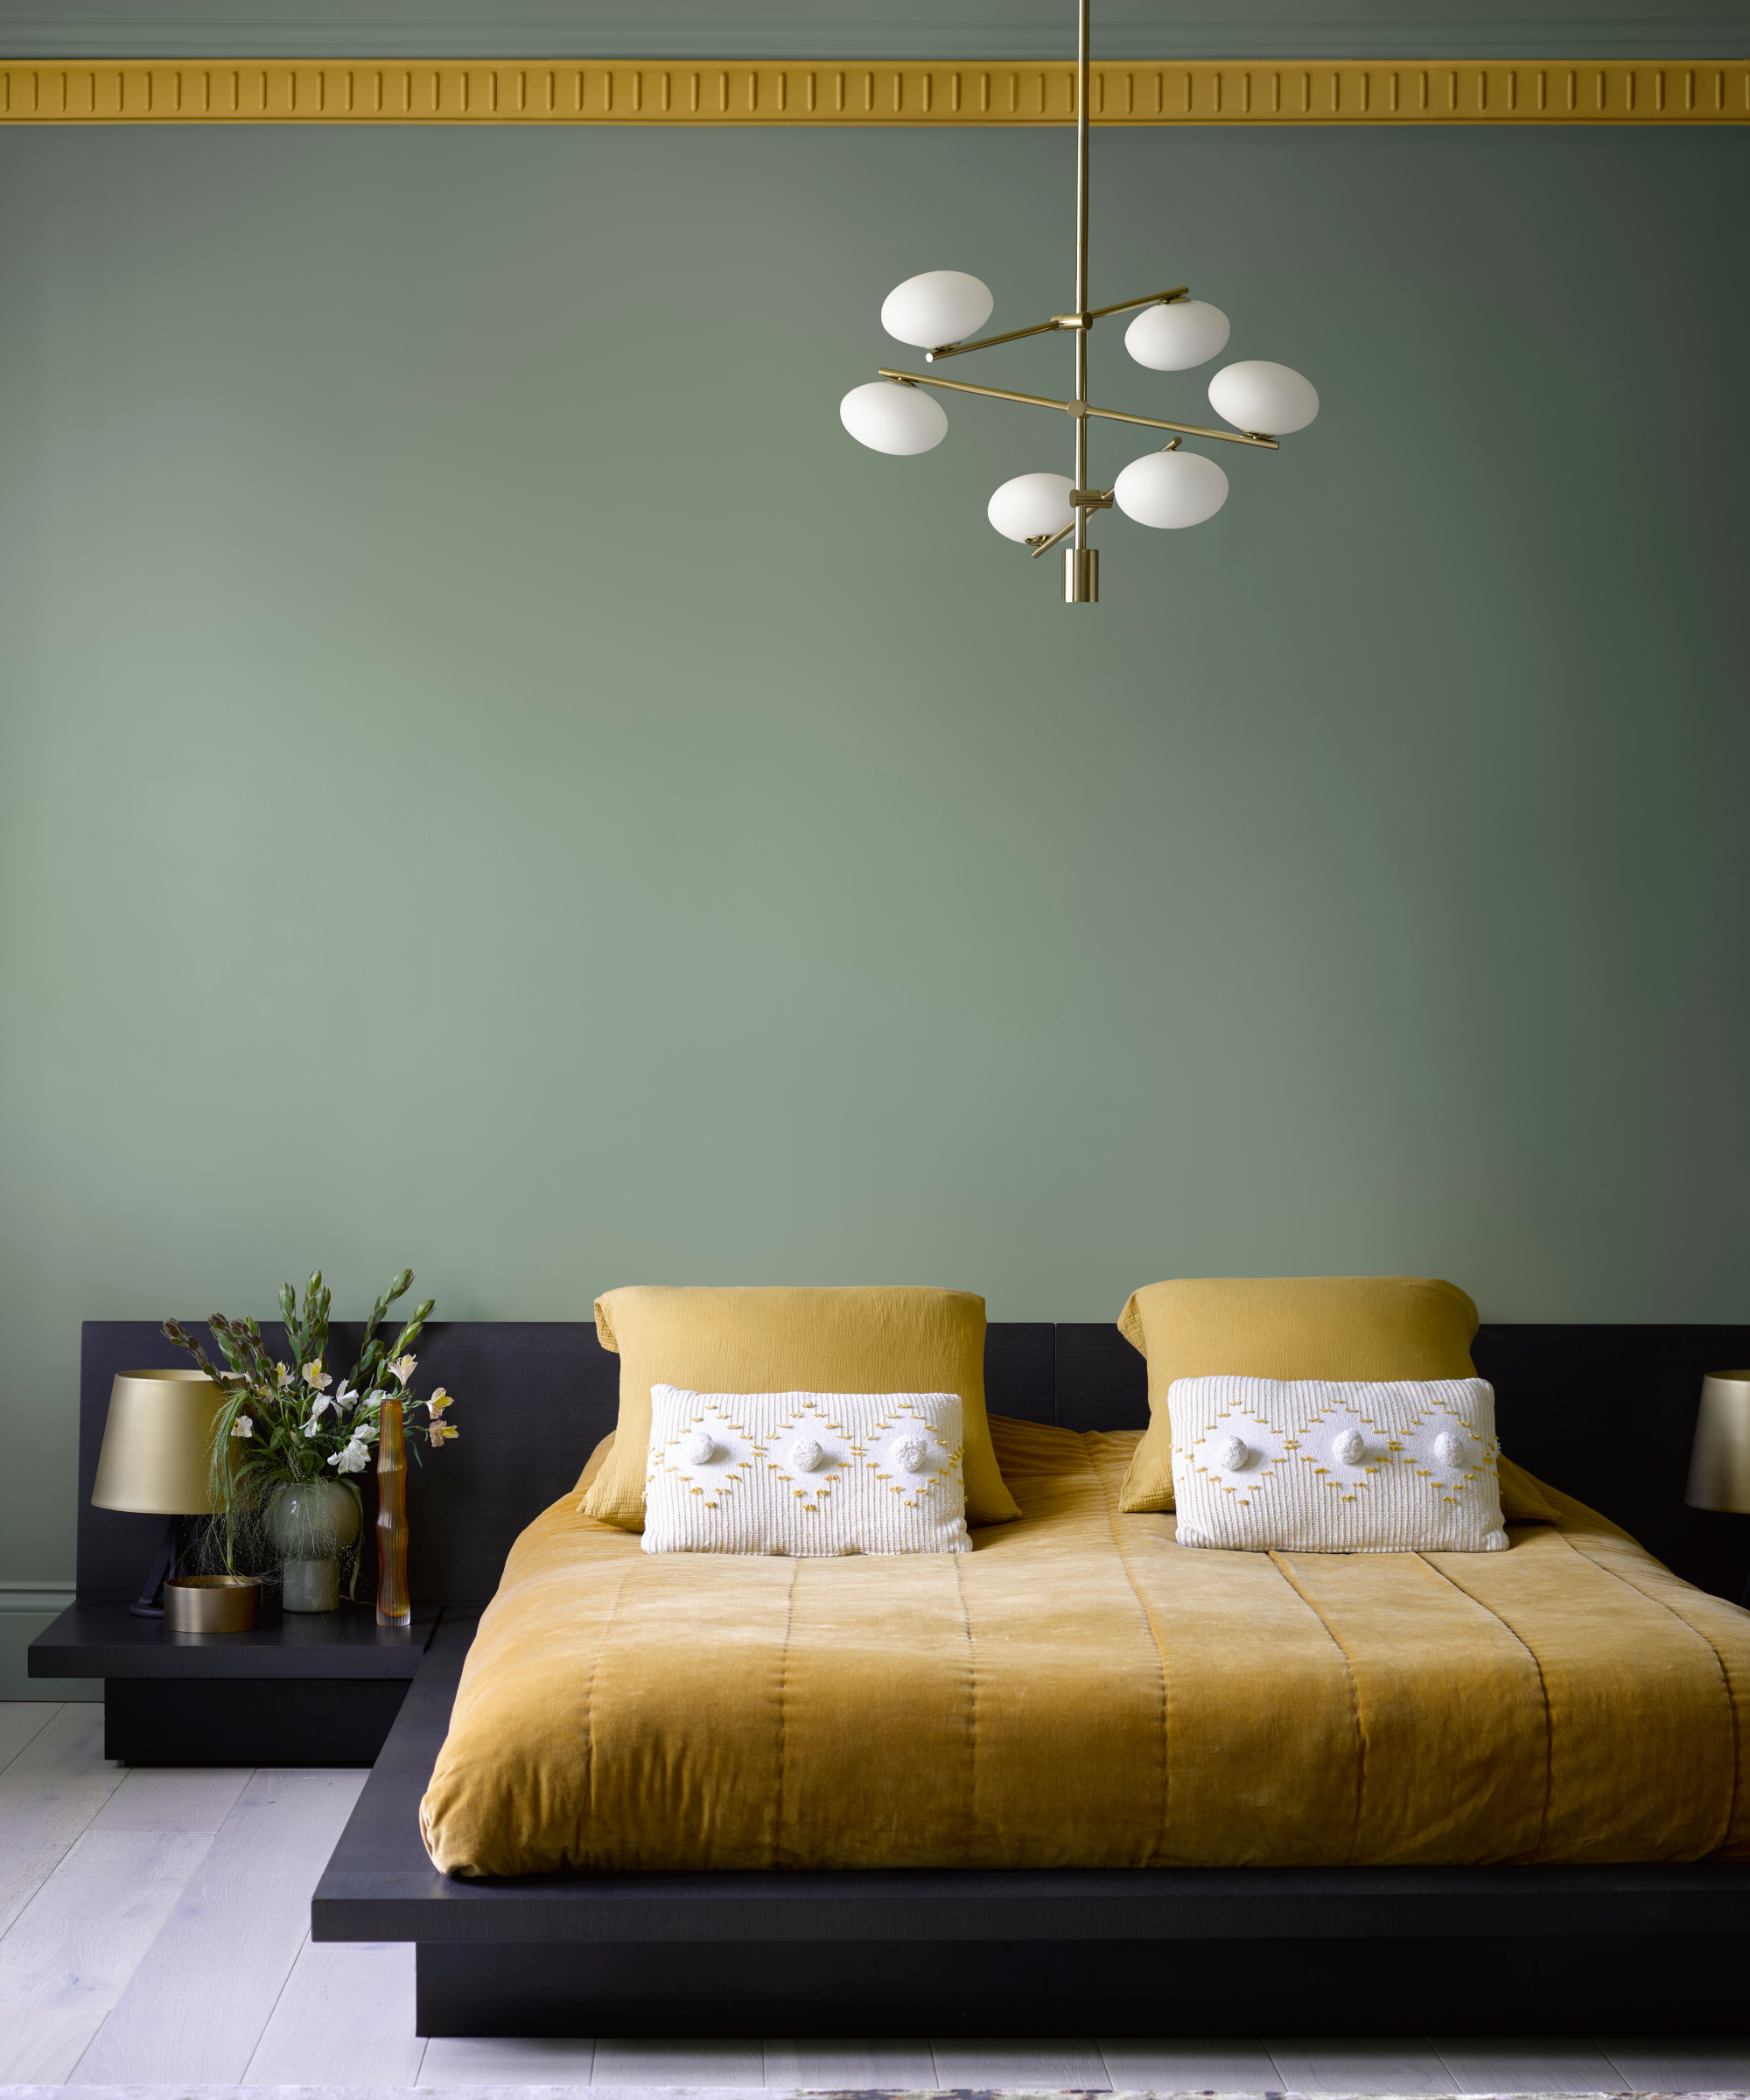 green painted walls with yellow trim, low navy platform bed with yellow bedding